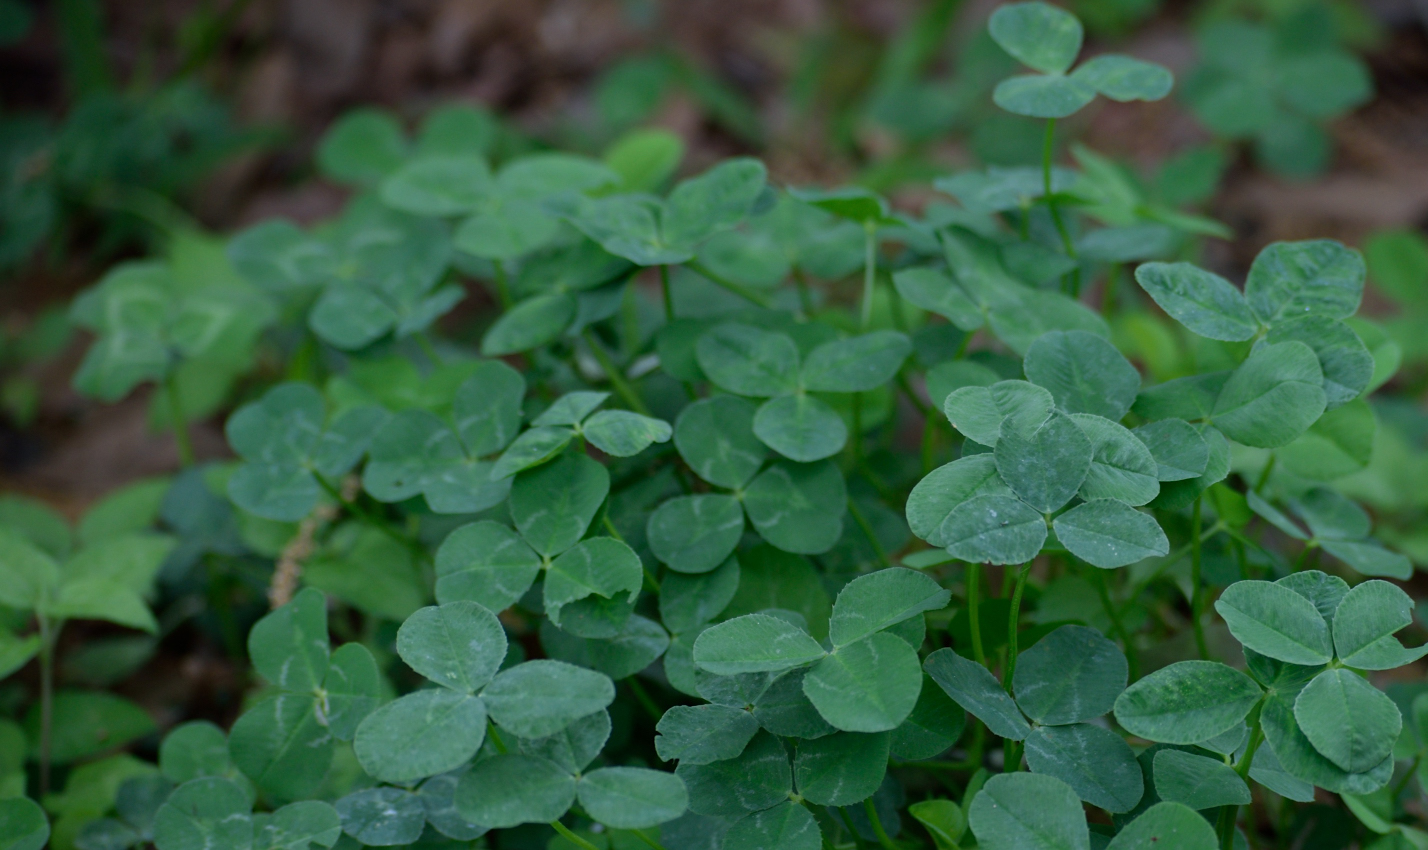 A patch of shamrocks on the UHCL campus. Photo courtesy of Leif Hayman.